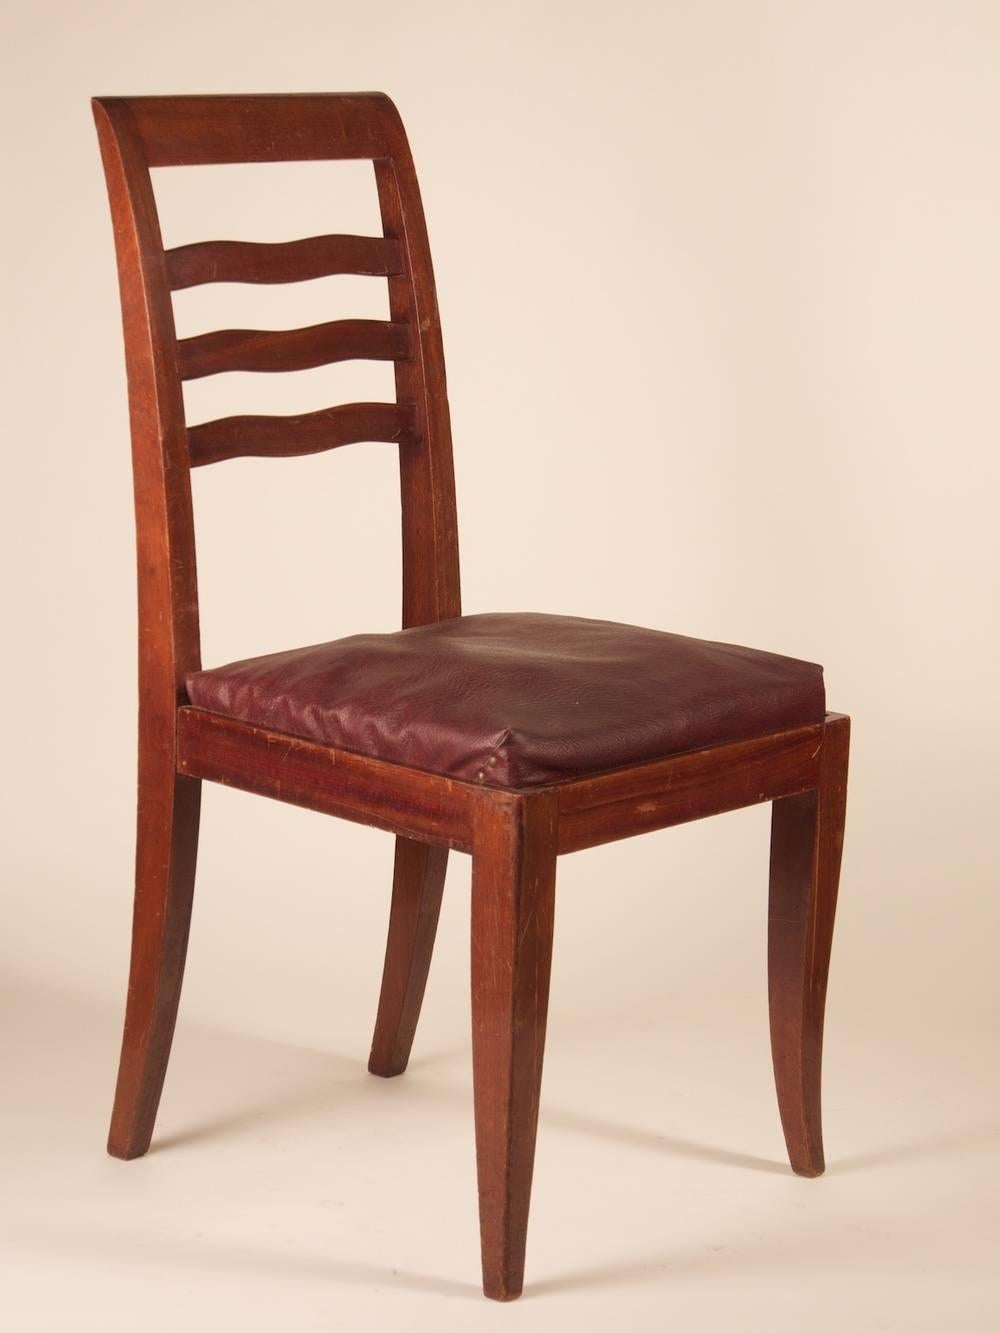 French Art Deco dining chairs, set of six, in mahogany, circa 1938.

Please note that these chairs are unrestored in the photographs.

**PRICE includes proper restoration, refinishing and reupholstering with buyer supplied fabric.
     